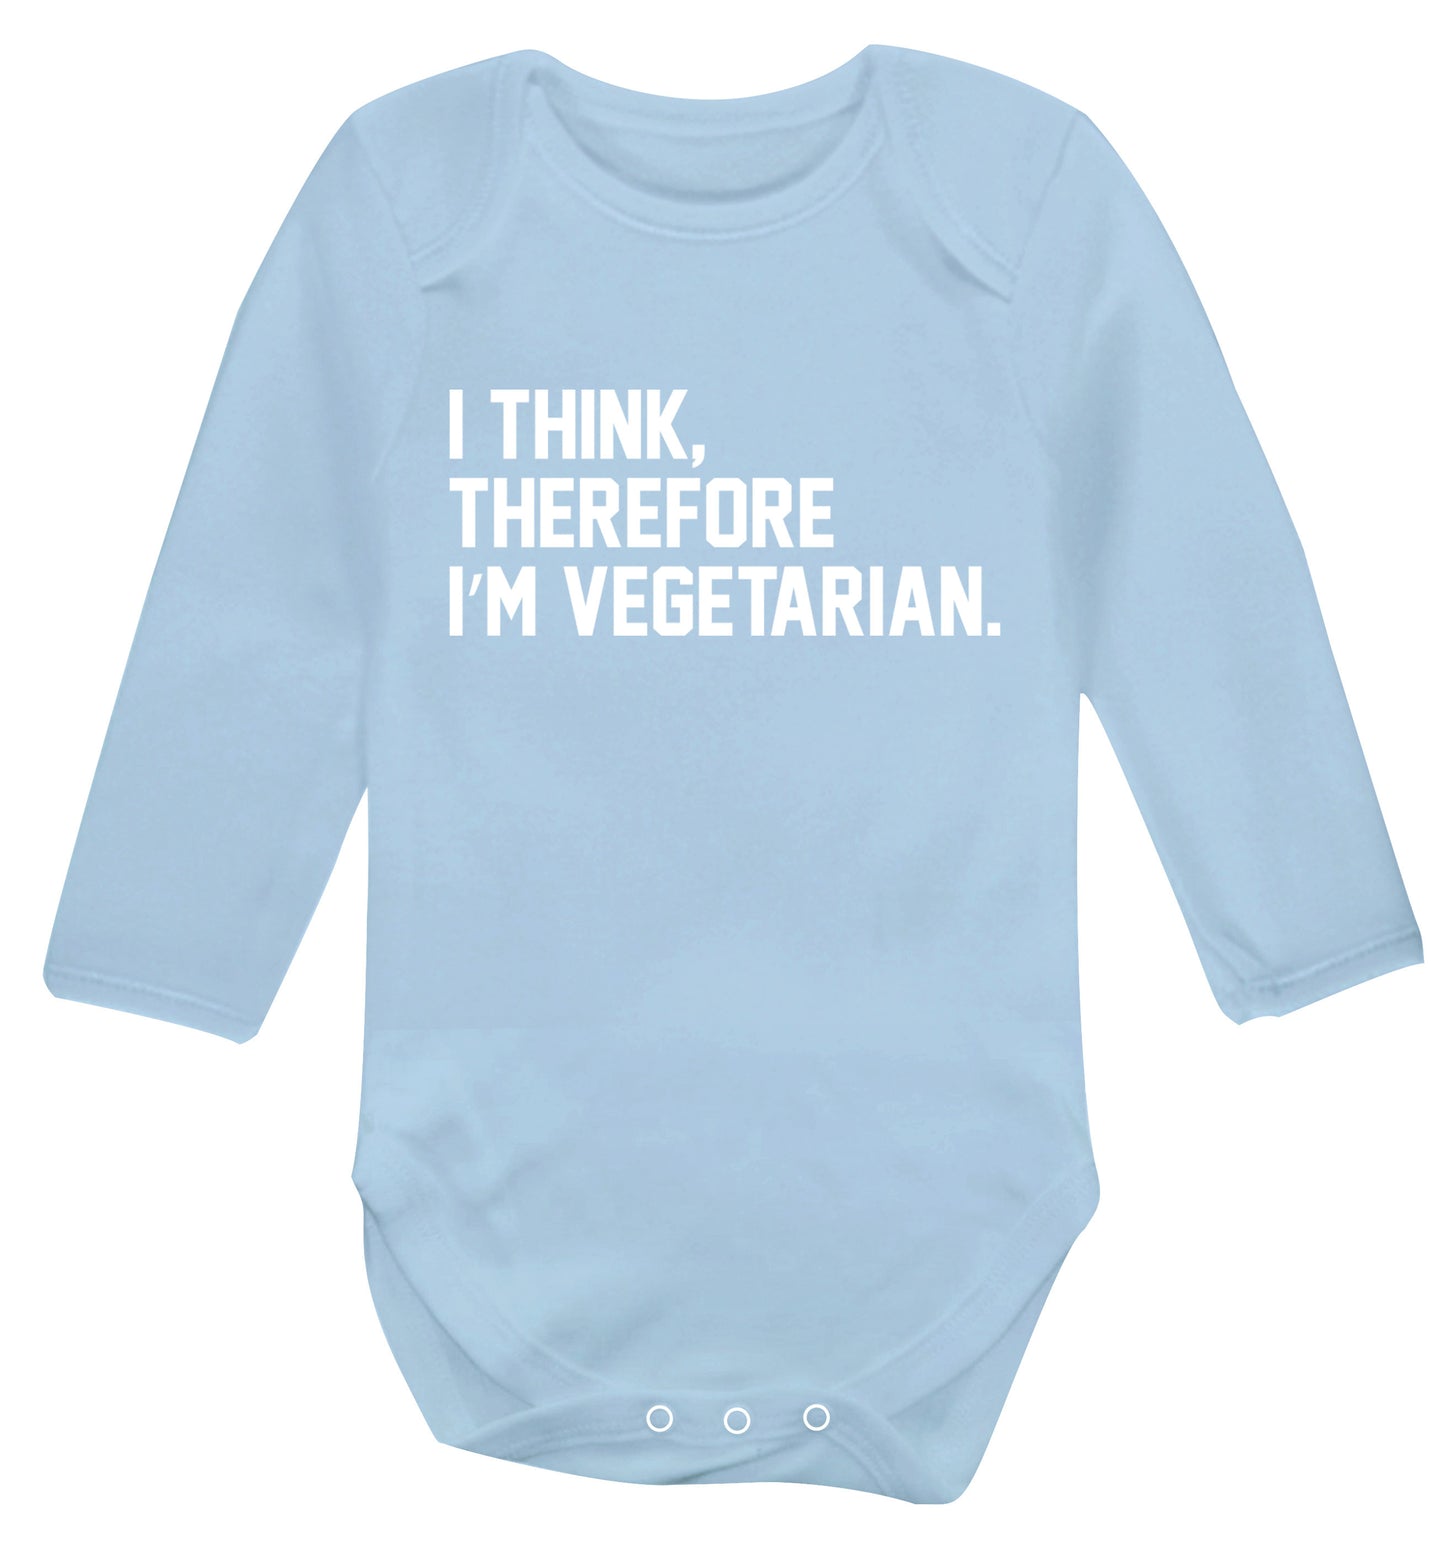 I think therefore I'm vegetarian Baby Vest long sleeved pale blue 6-12 months